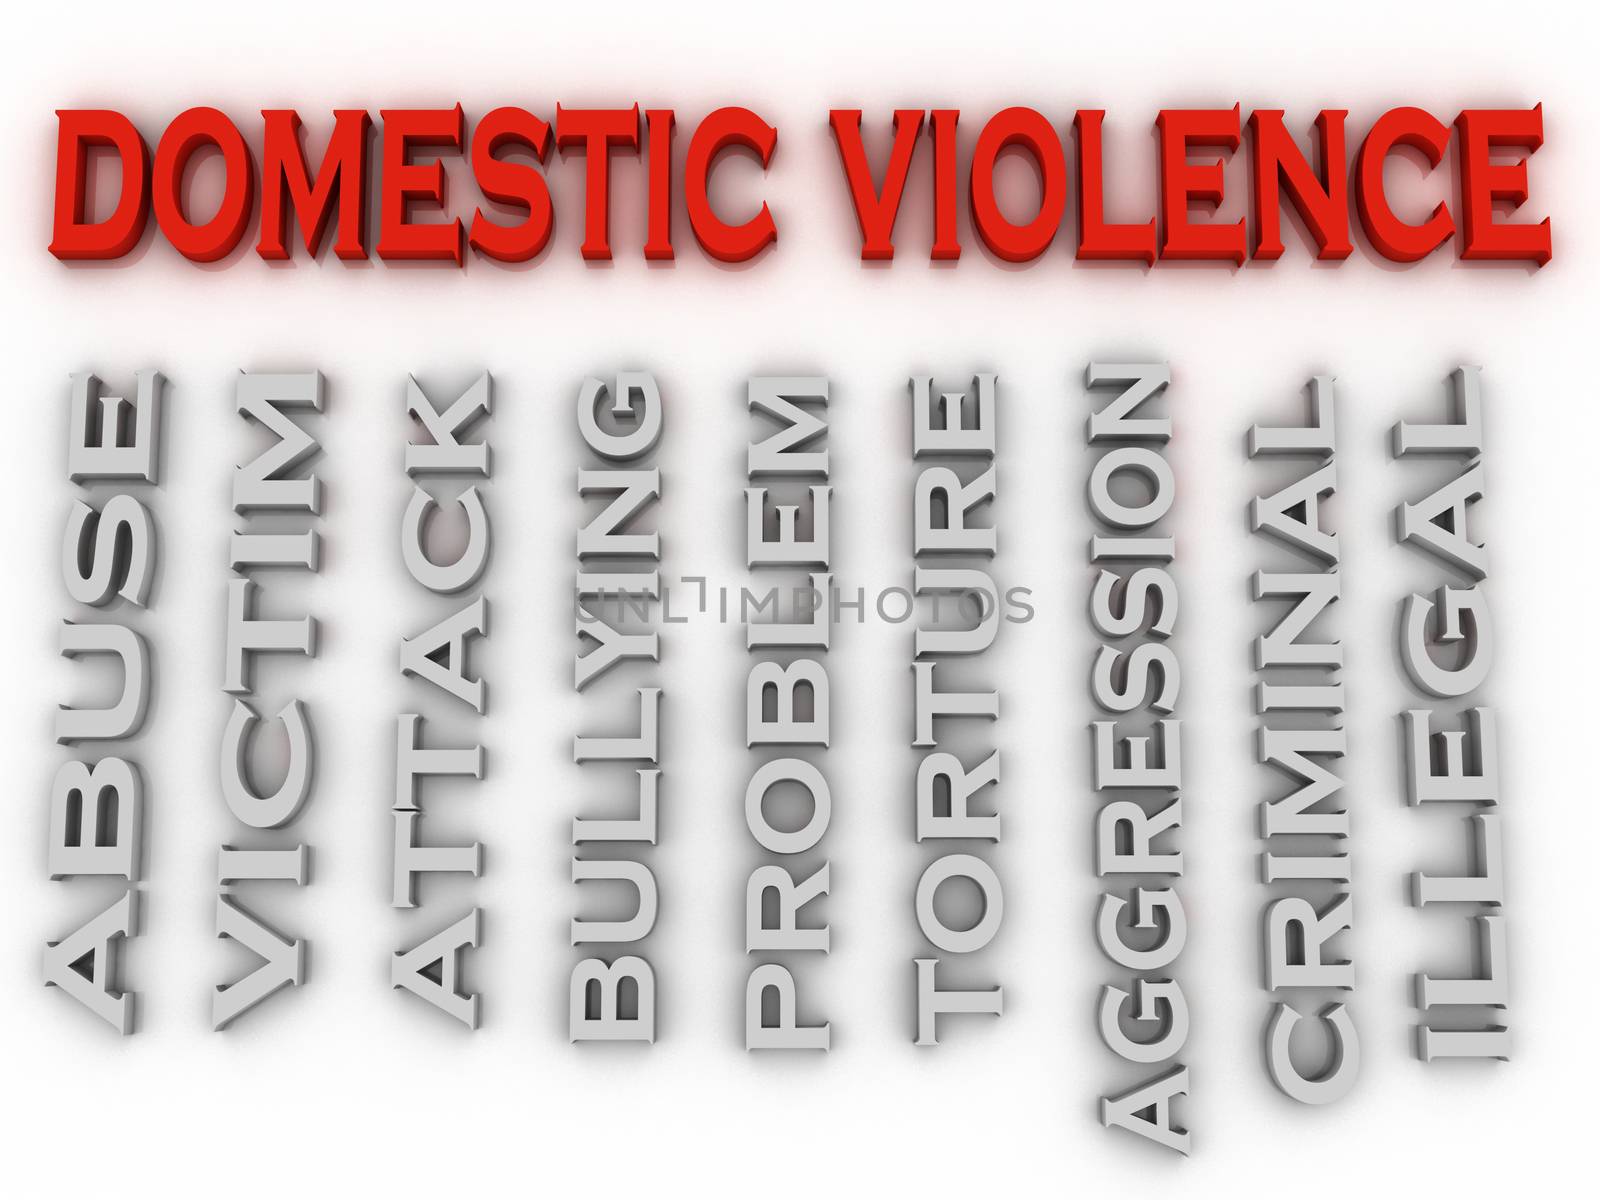 3d image Domestic violence issues concept word cloud background by dacasdo